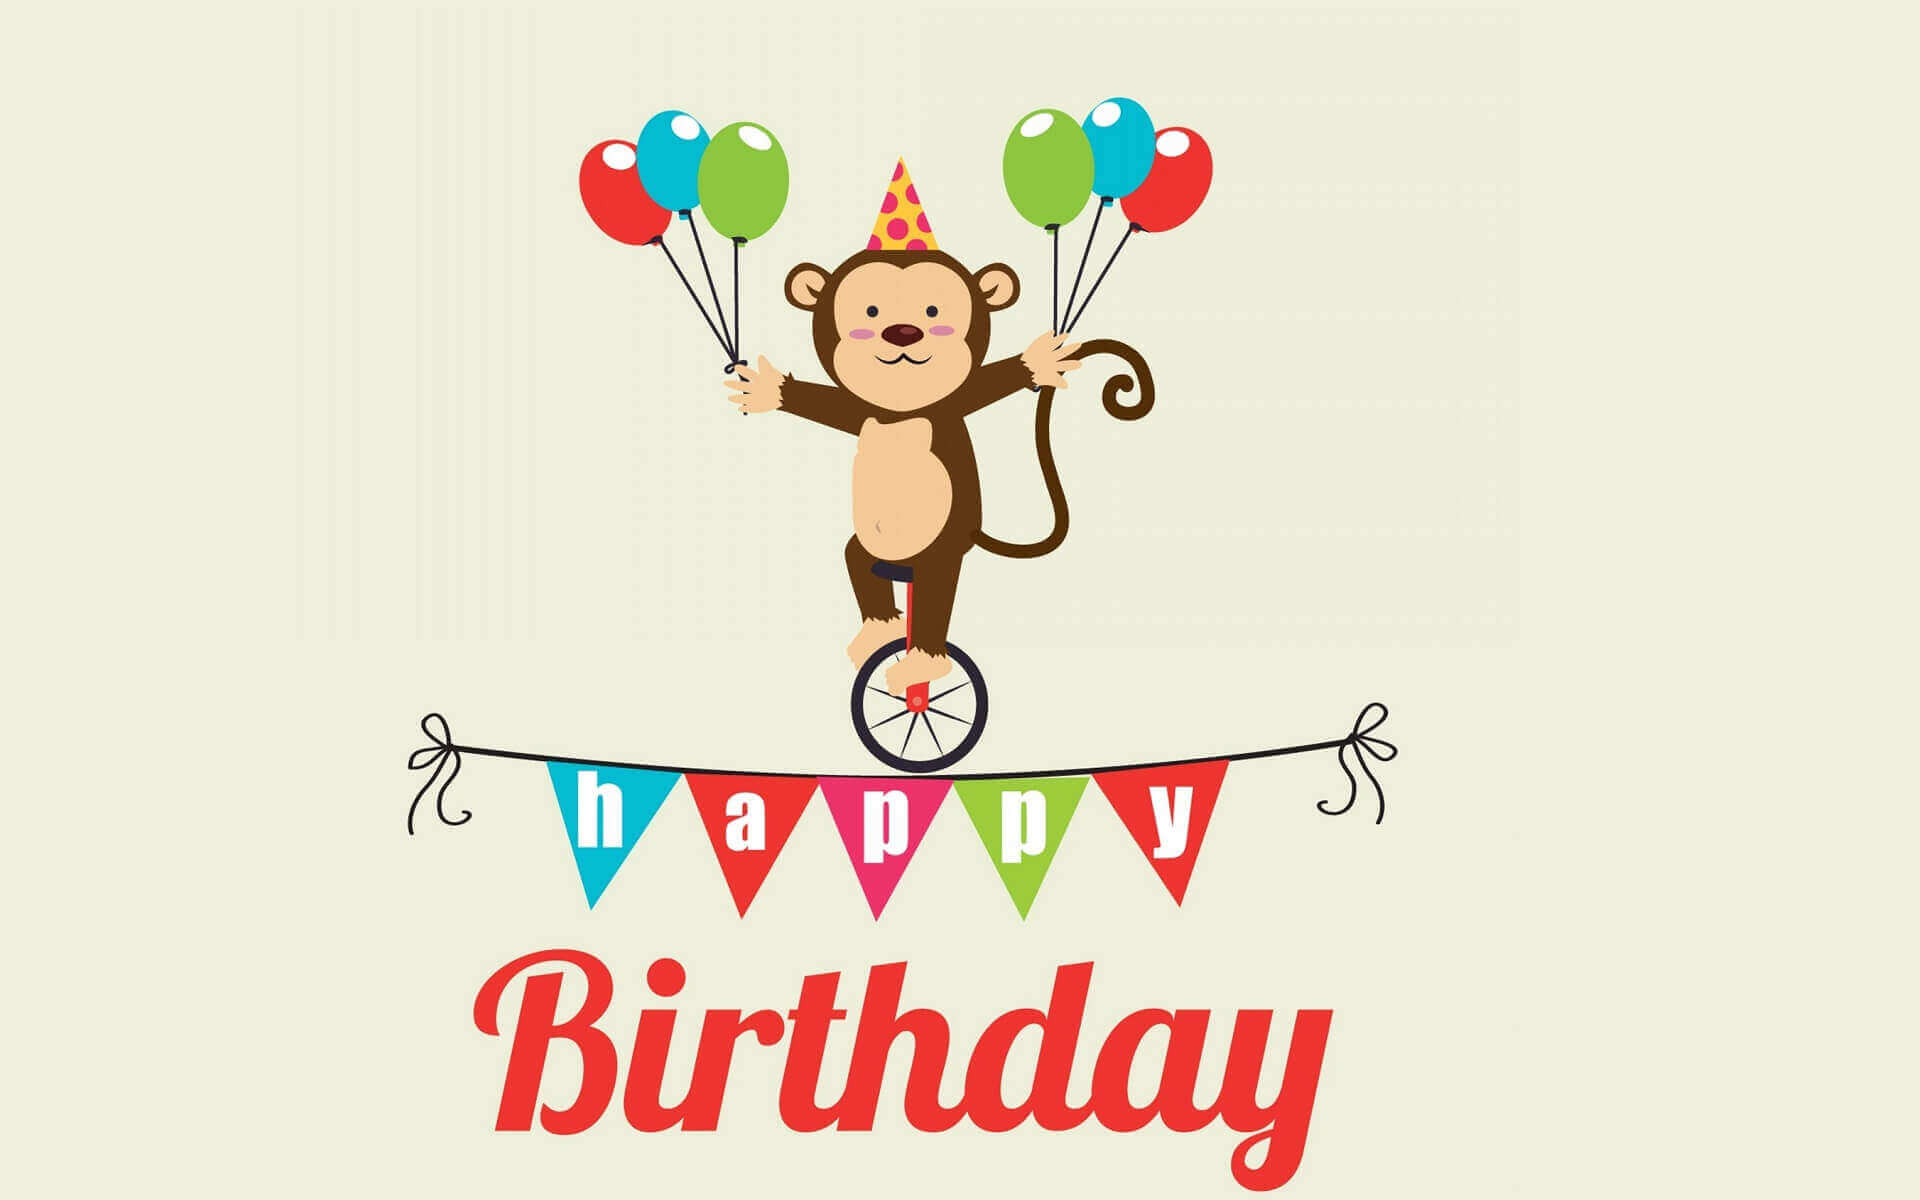 Happy Birthday Wishes To A Friend Funny
 200 Funny Happy Birthday Wishes Quotes Ever FungiStaaan